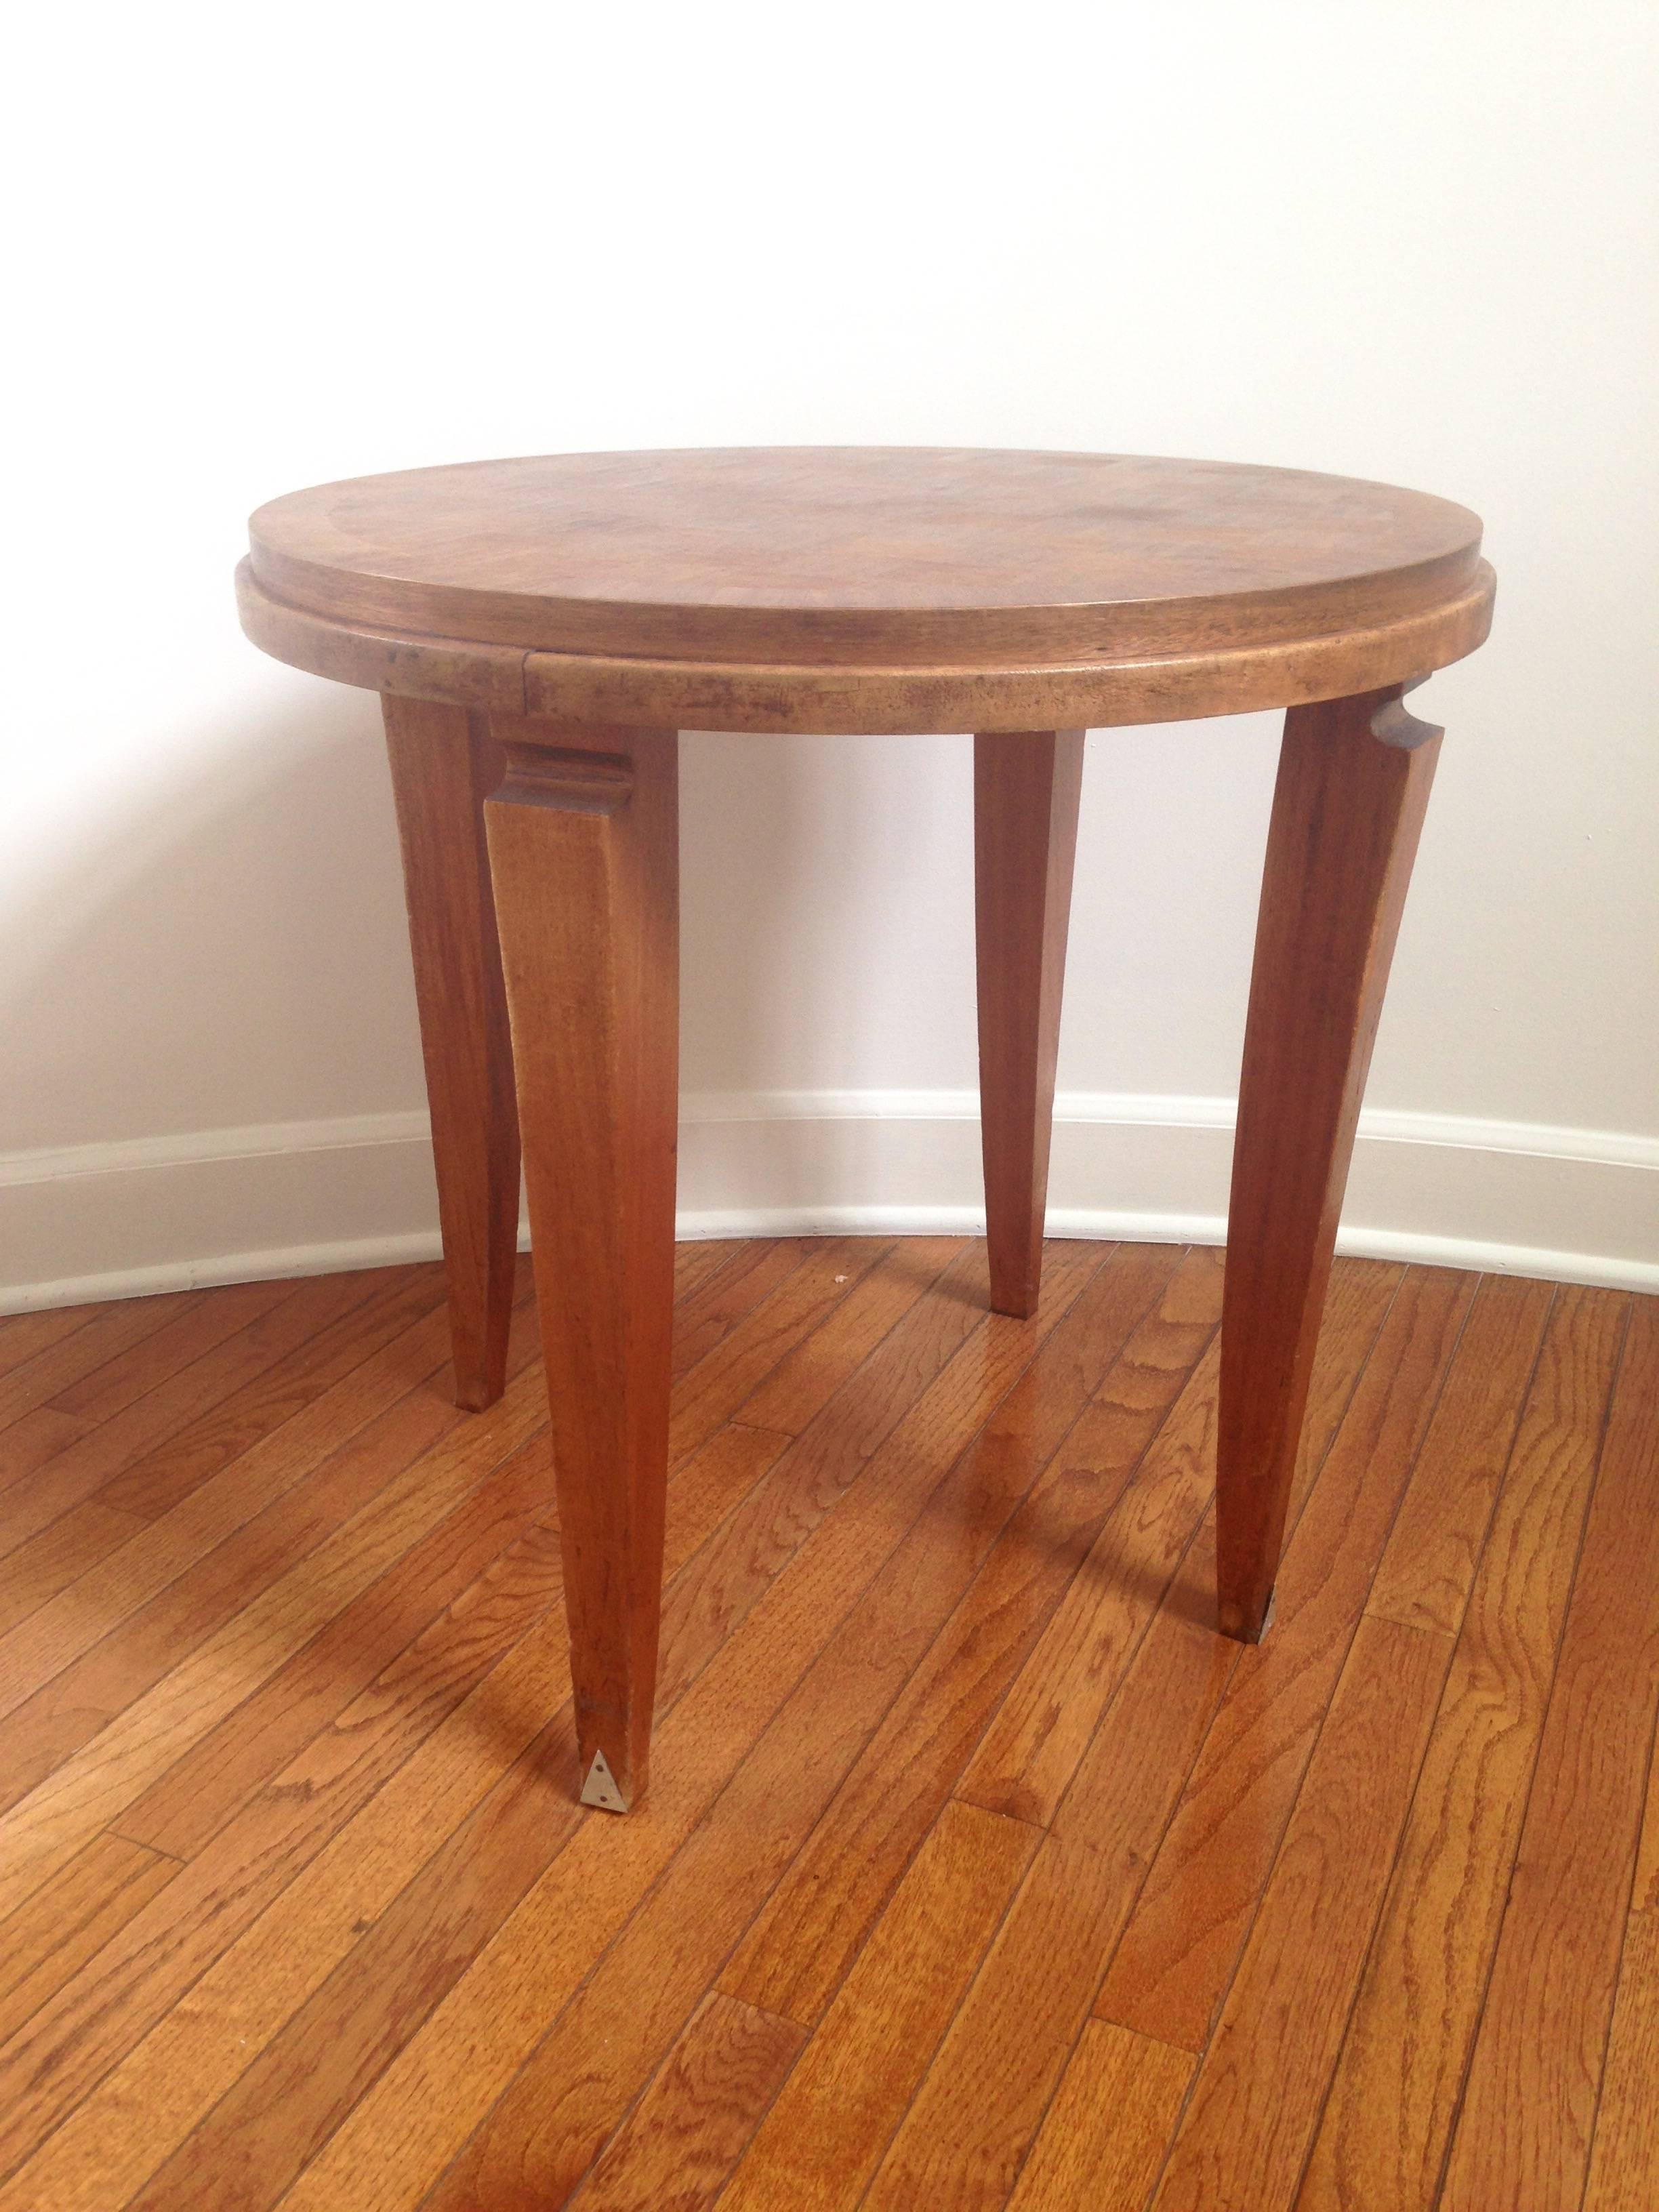 Modern Dominique or Adnet Style French Gueridon or Round Table For Sale